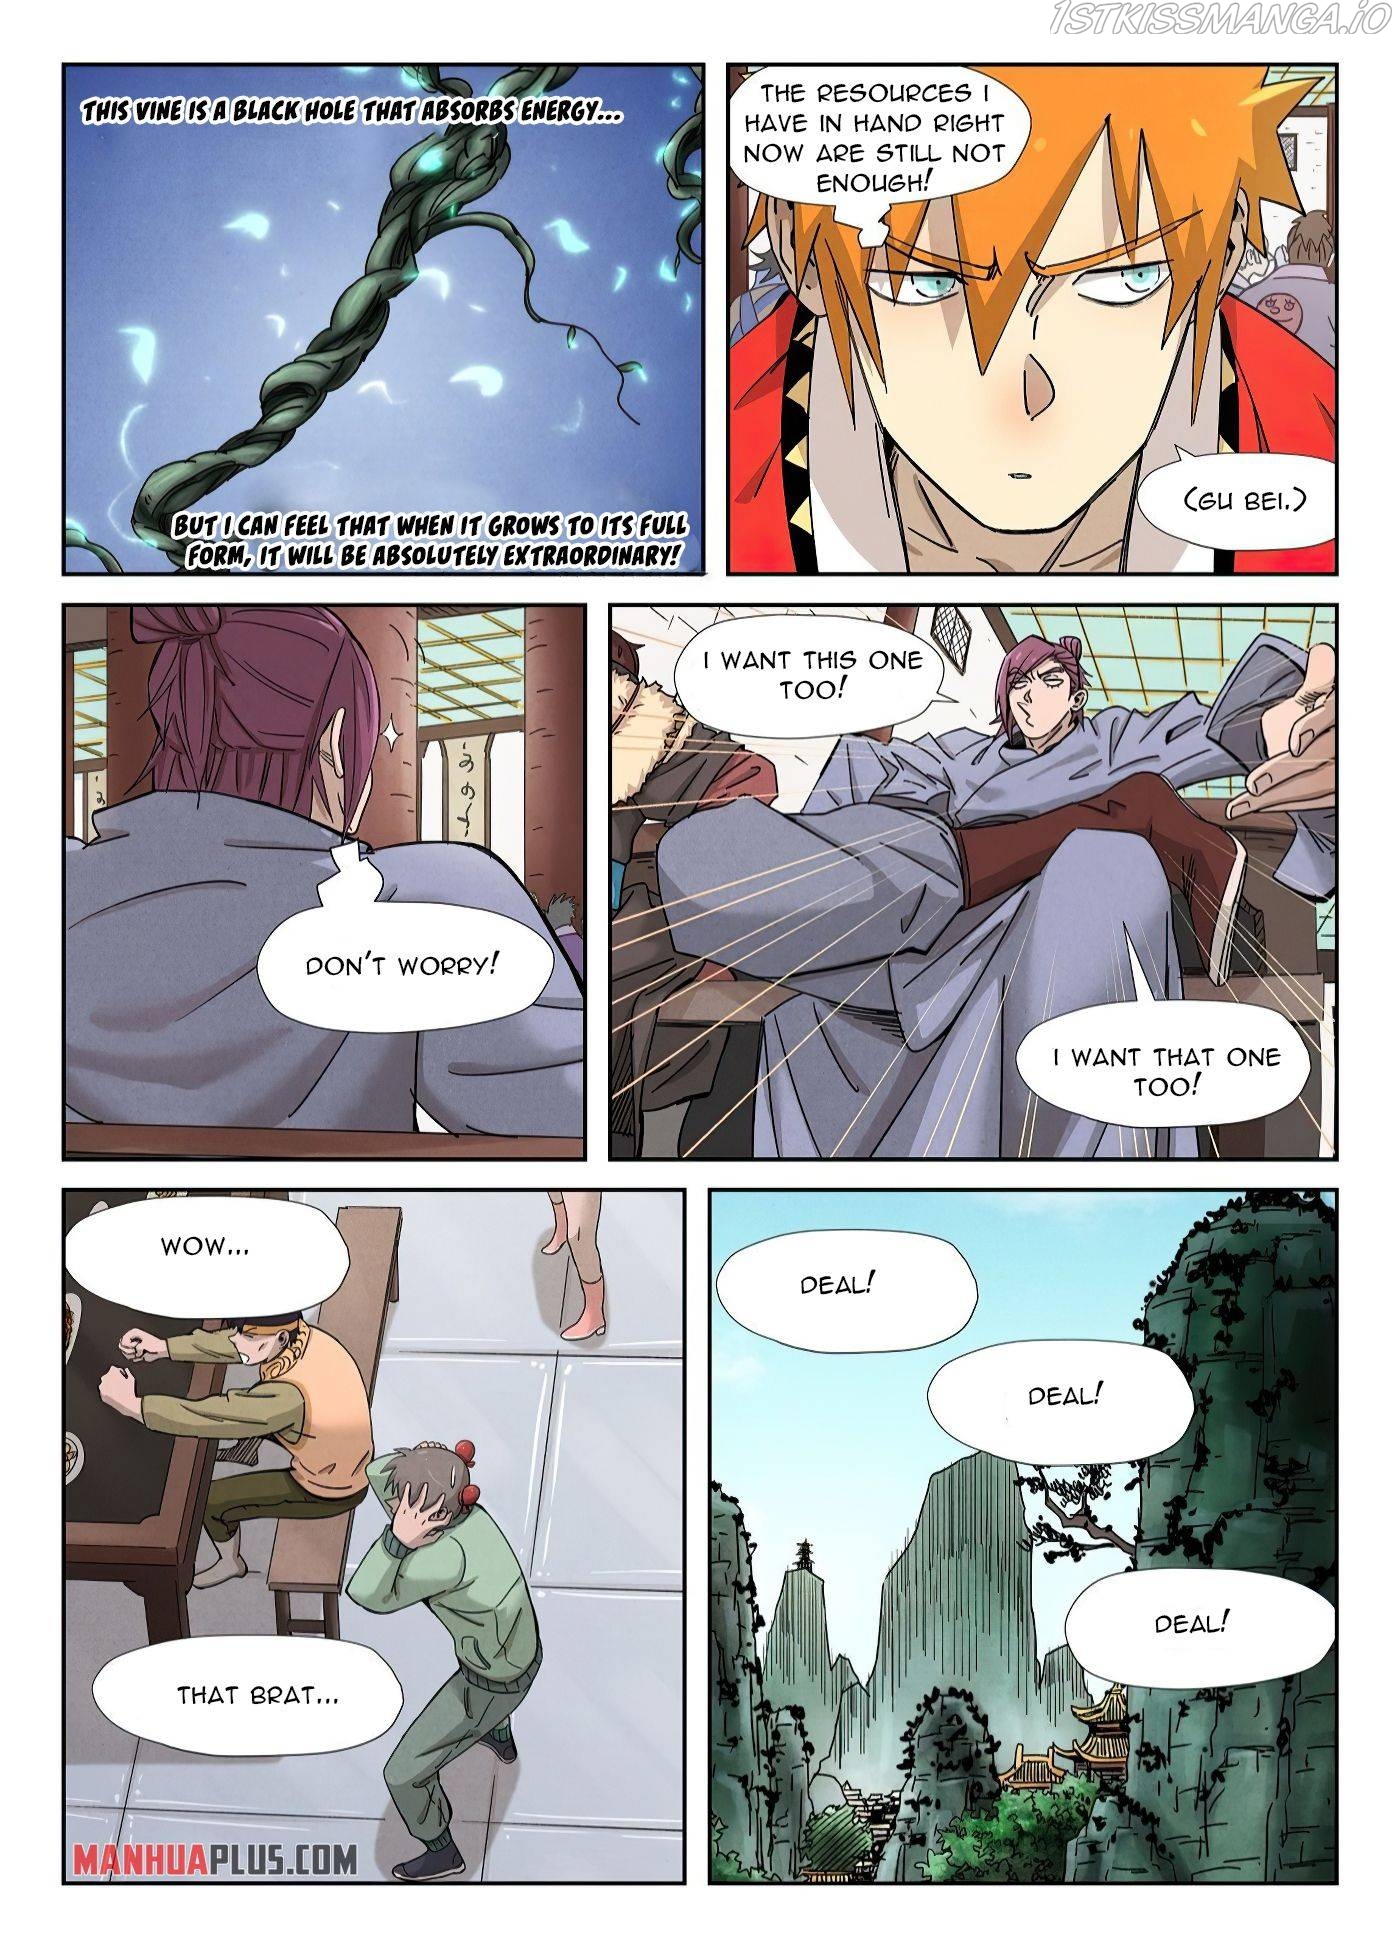 Tales of Demons and Gods Manhua Chapter 337.1 - Page 2